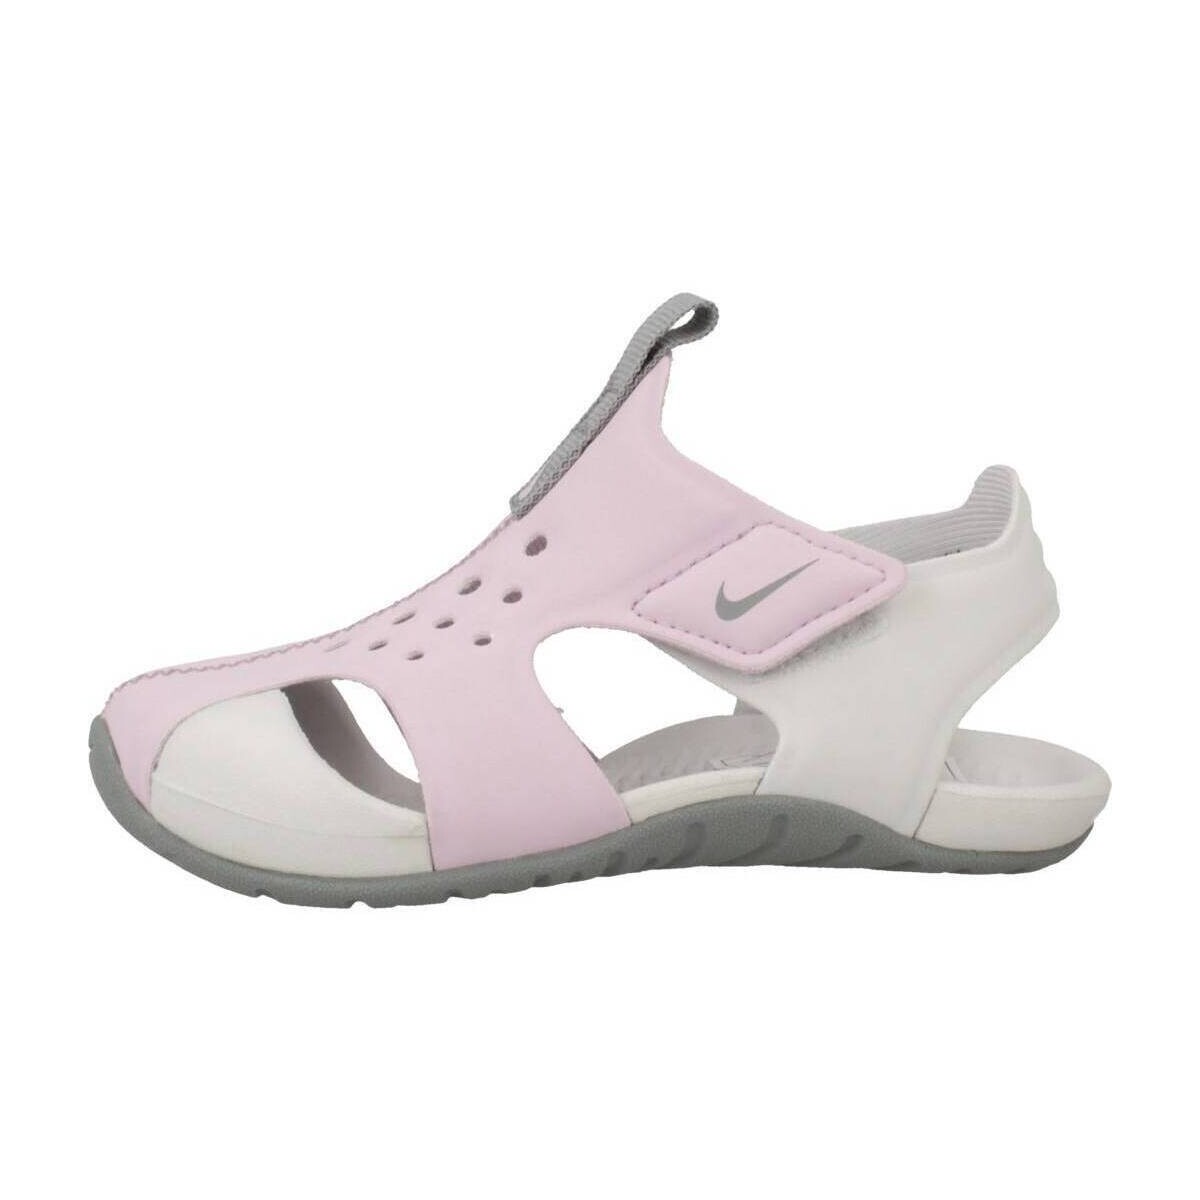 Nike Rose SUNRAY PROTECT 2 wdp75JHC